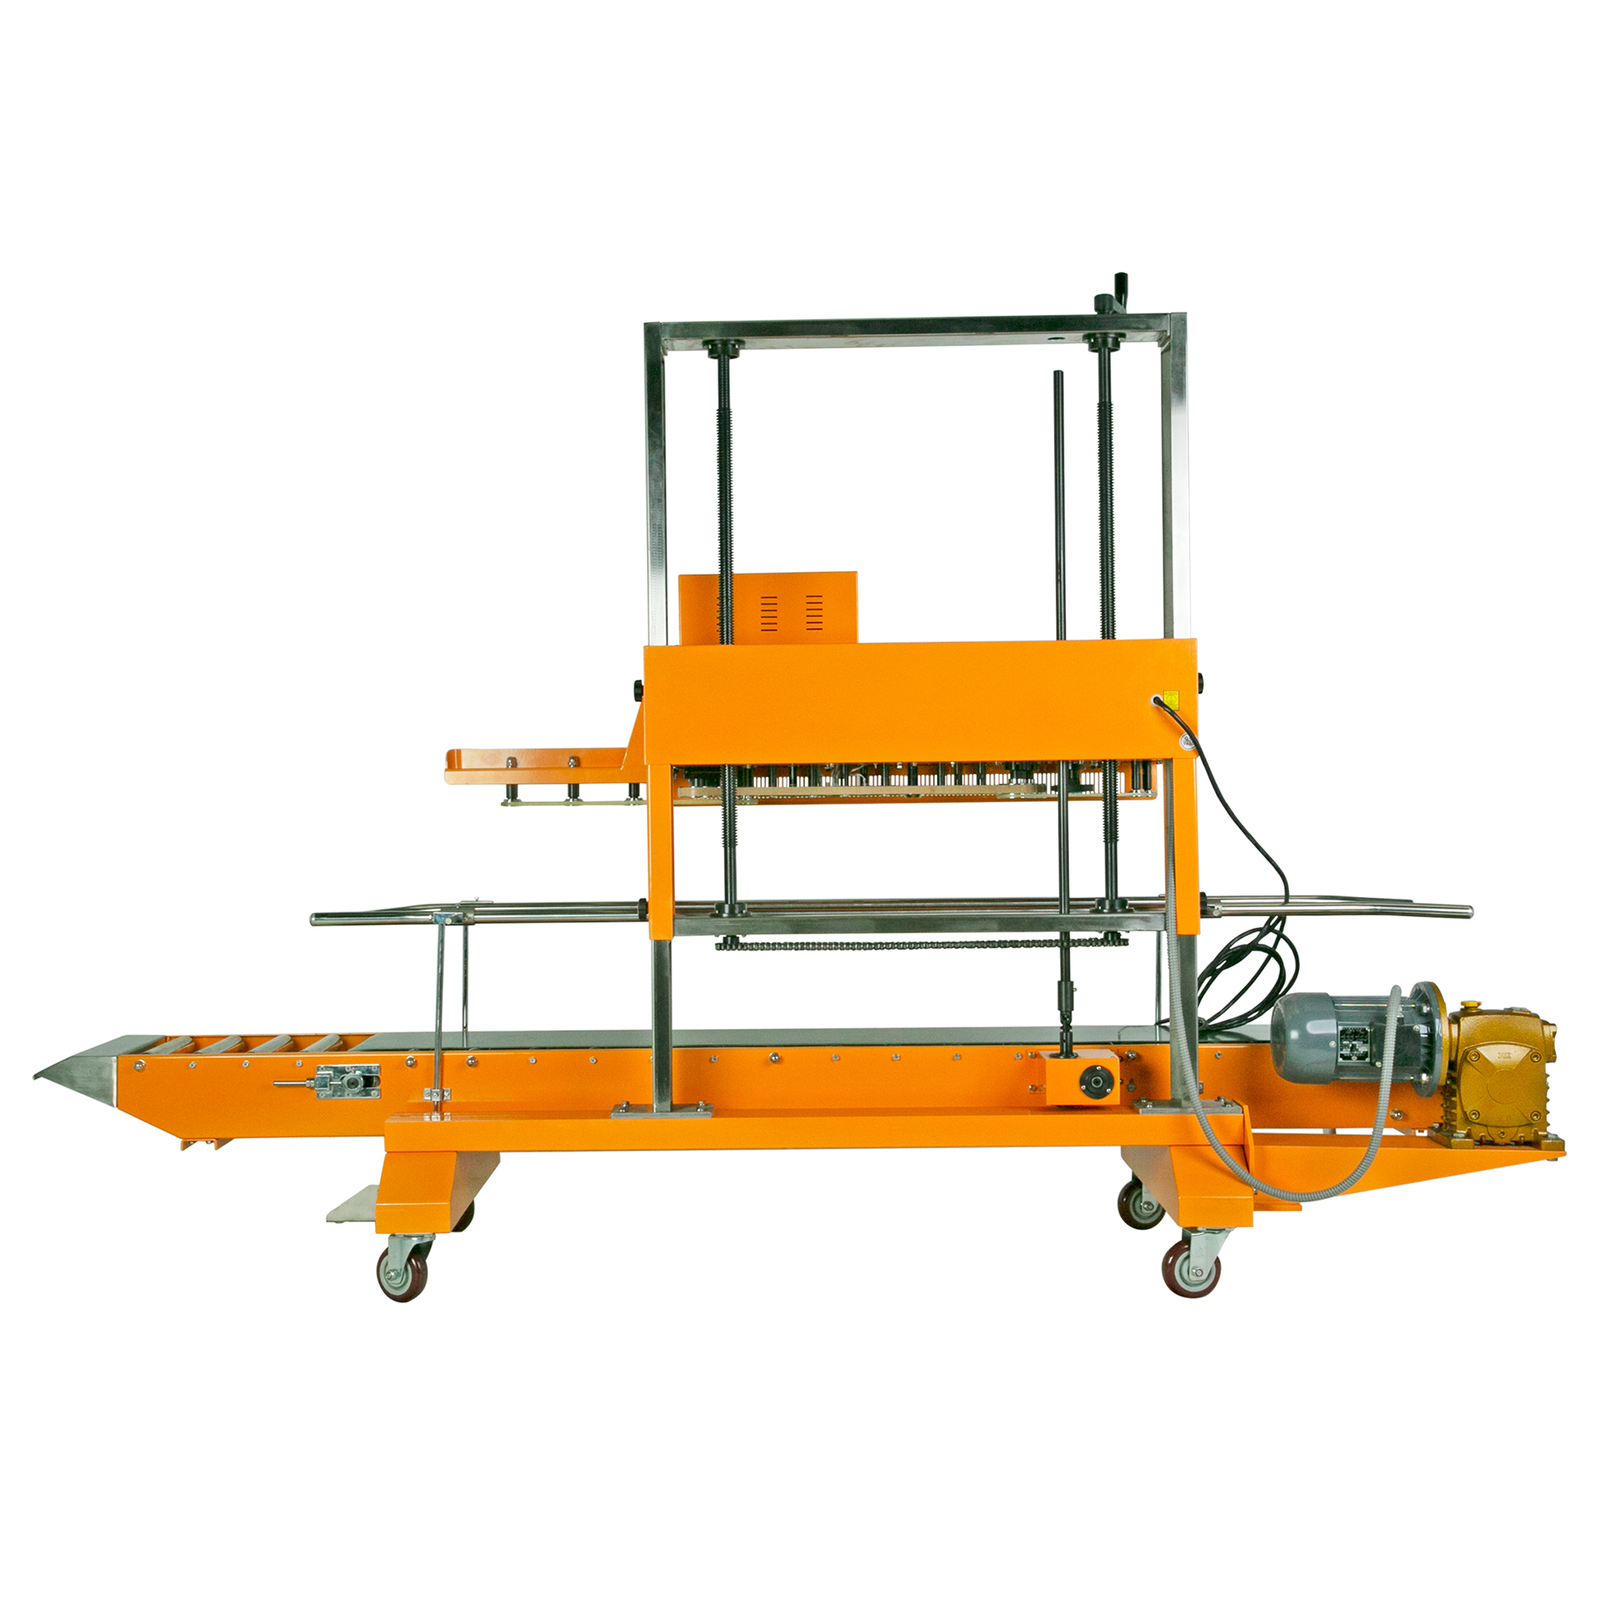 Back view of yellow JORESTECH heavy duty vertical continuous band sealer for sealing large bags